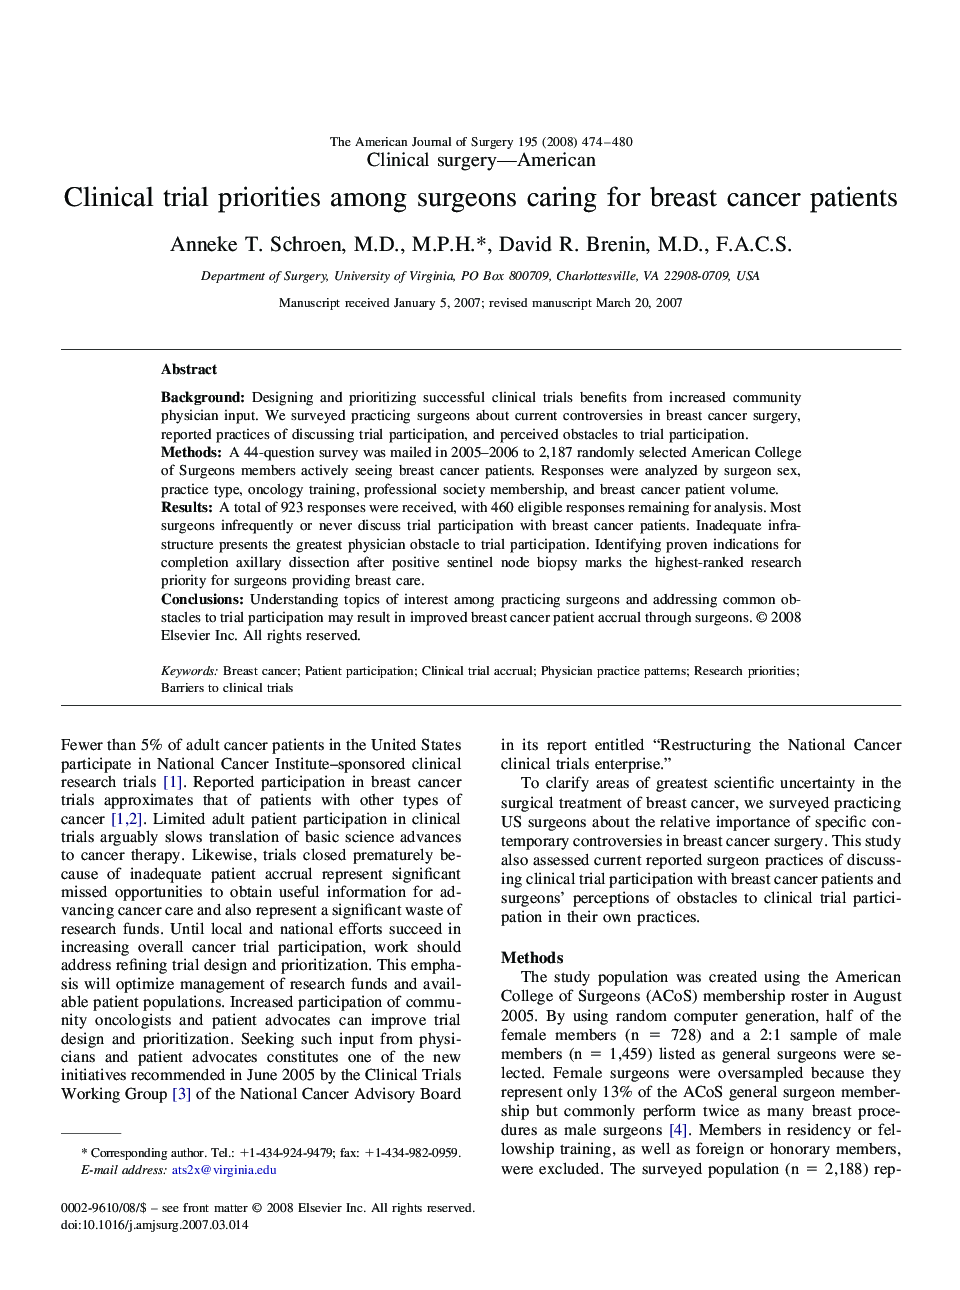 Clinical trial priorities among surgeons caring for breast cancer patients